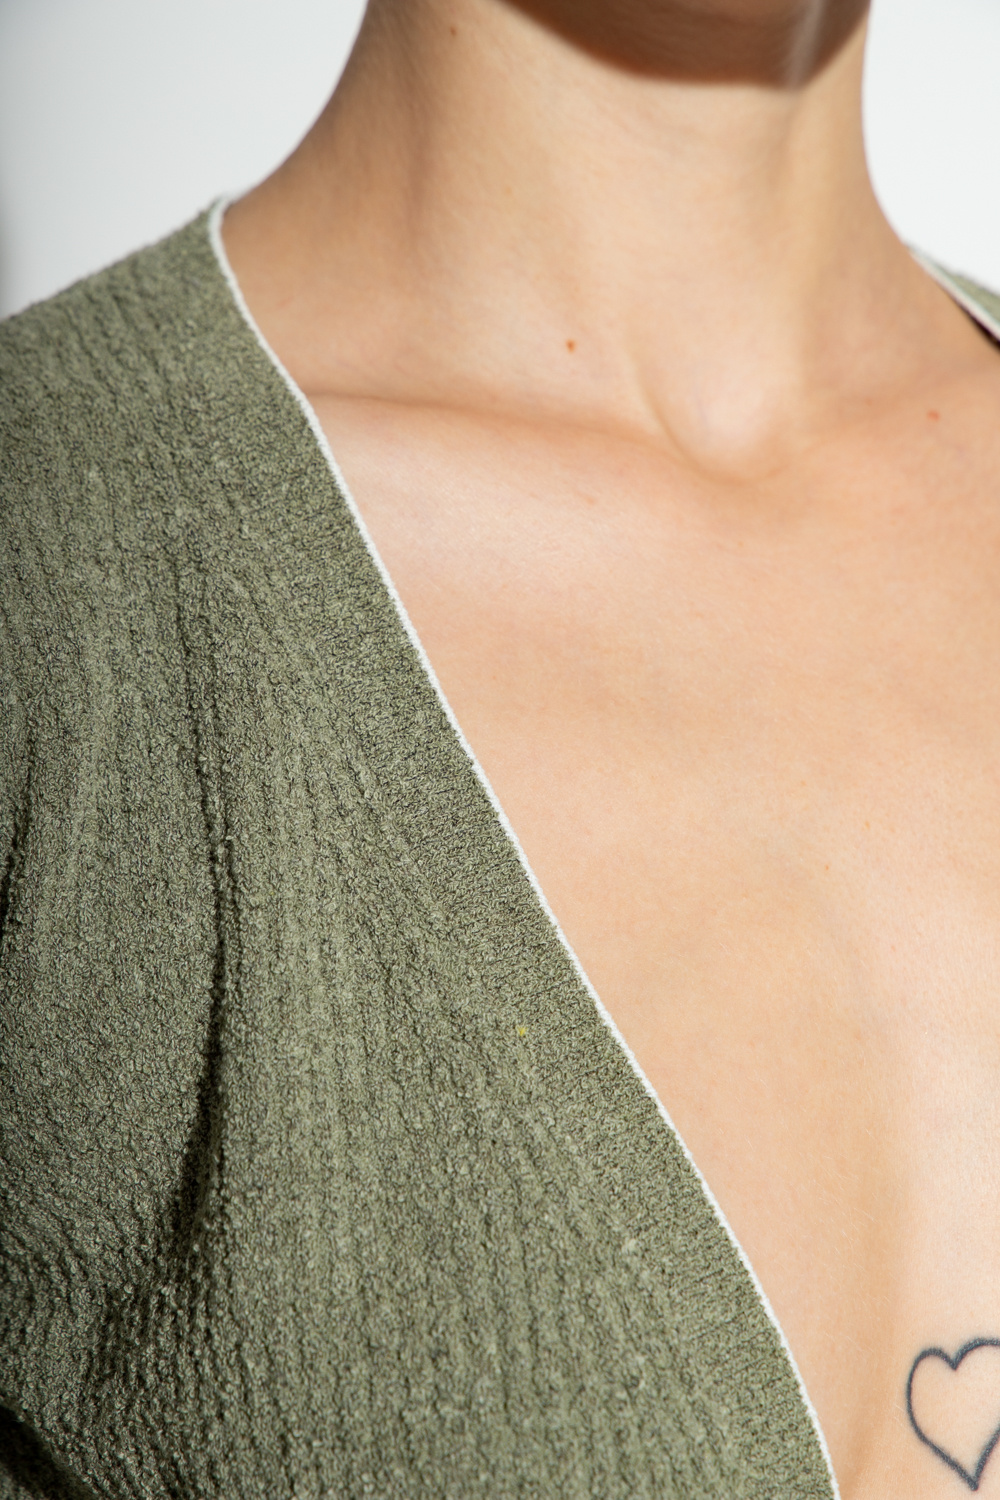 Jacquemus ‘Noue’ top with decorative knot